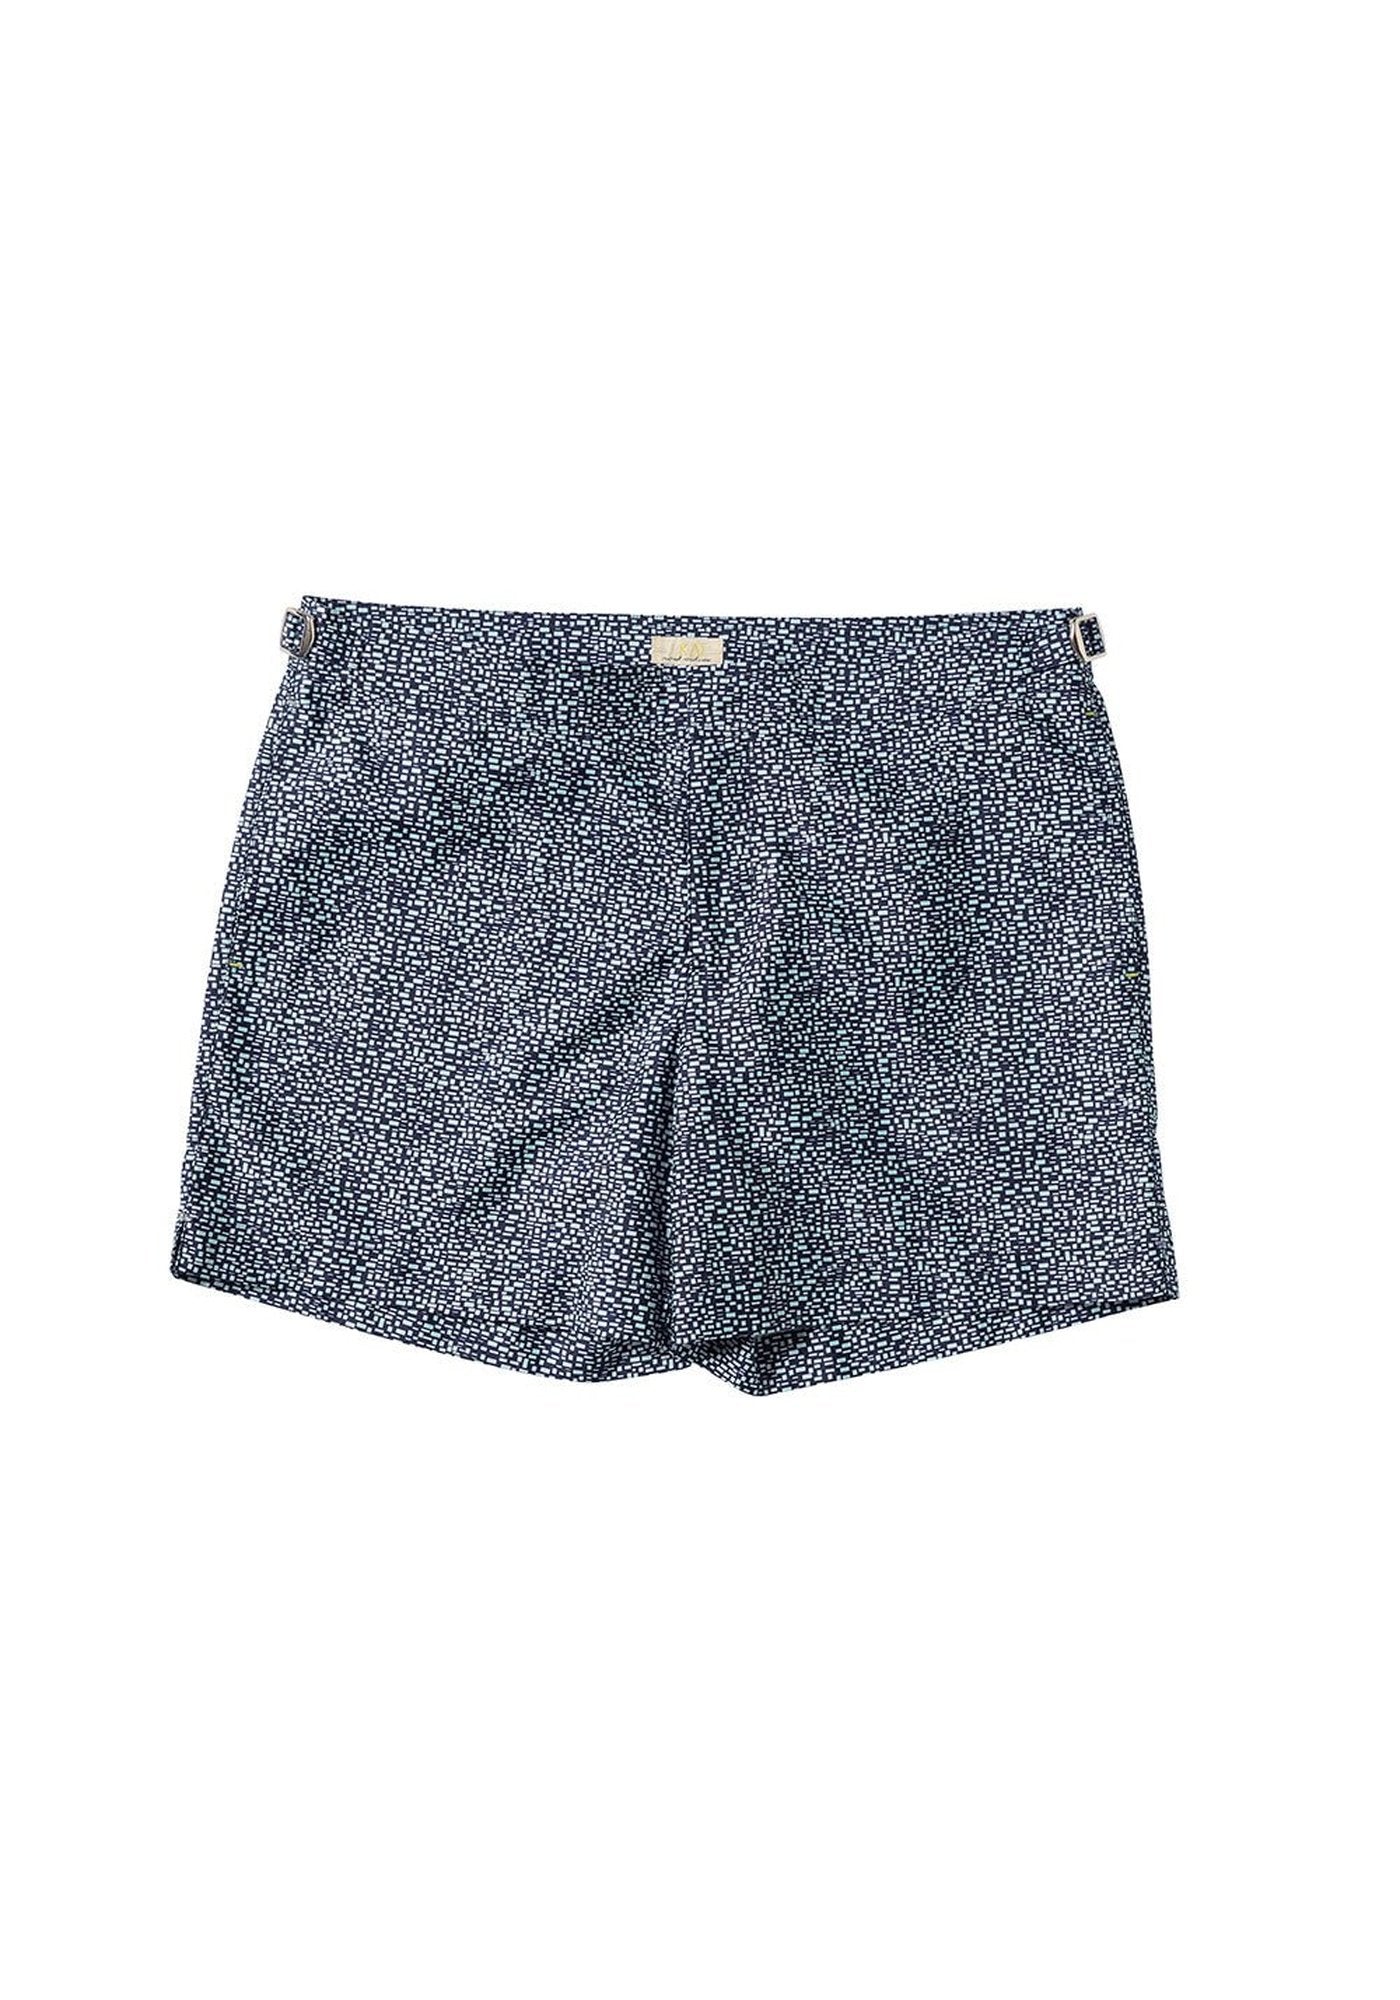 Swim Shorts Buckles Japanese Texture - Traces of Me